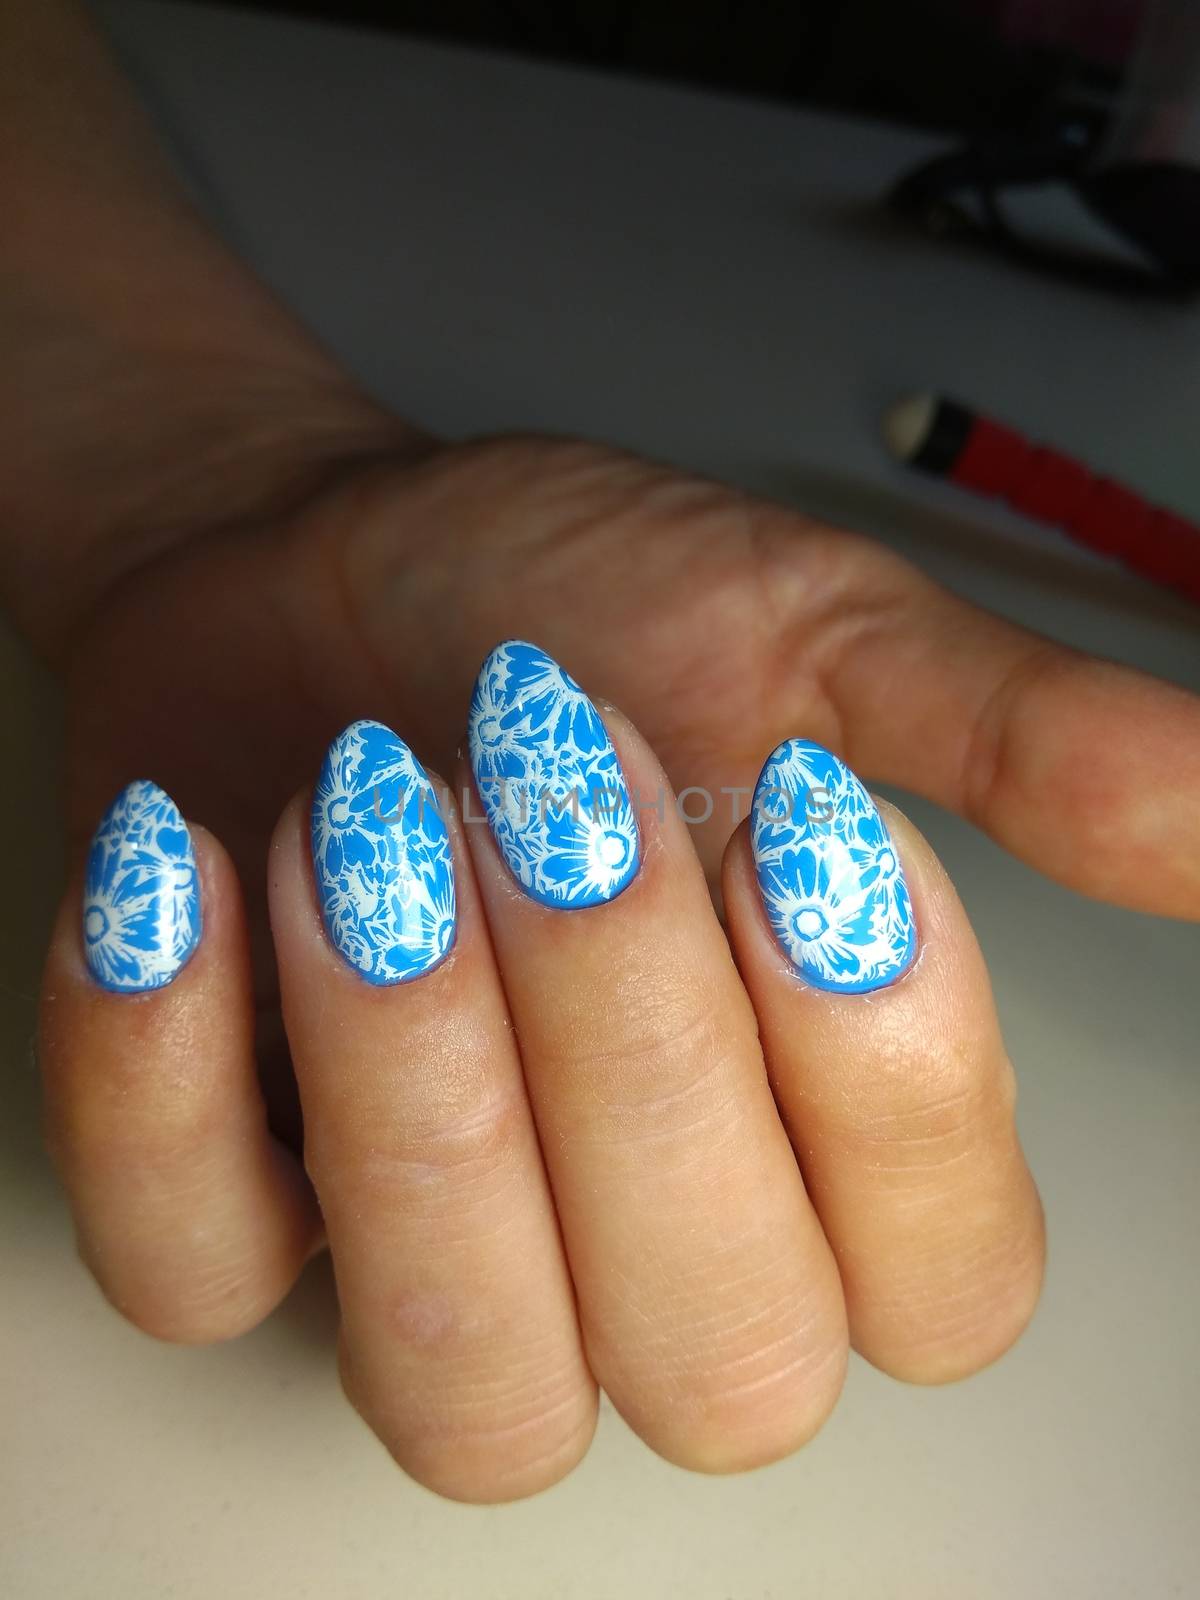 Here is presented one of the best manicure designs this year's Nail Marine